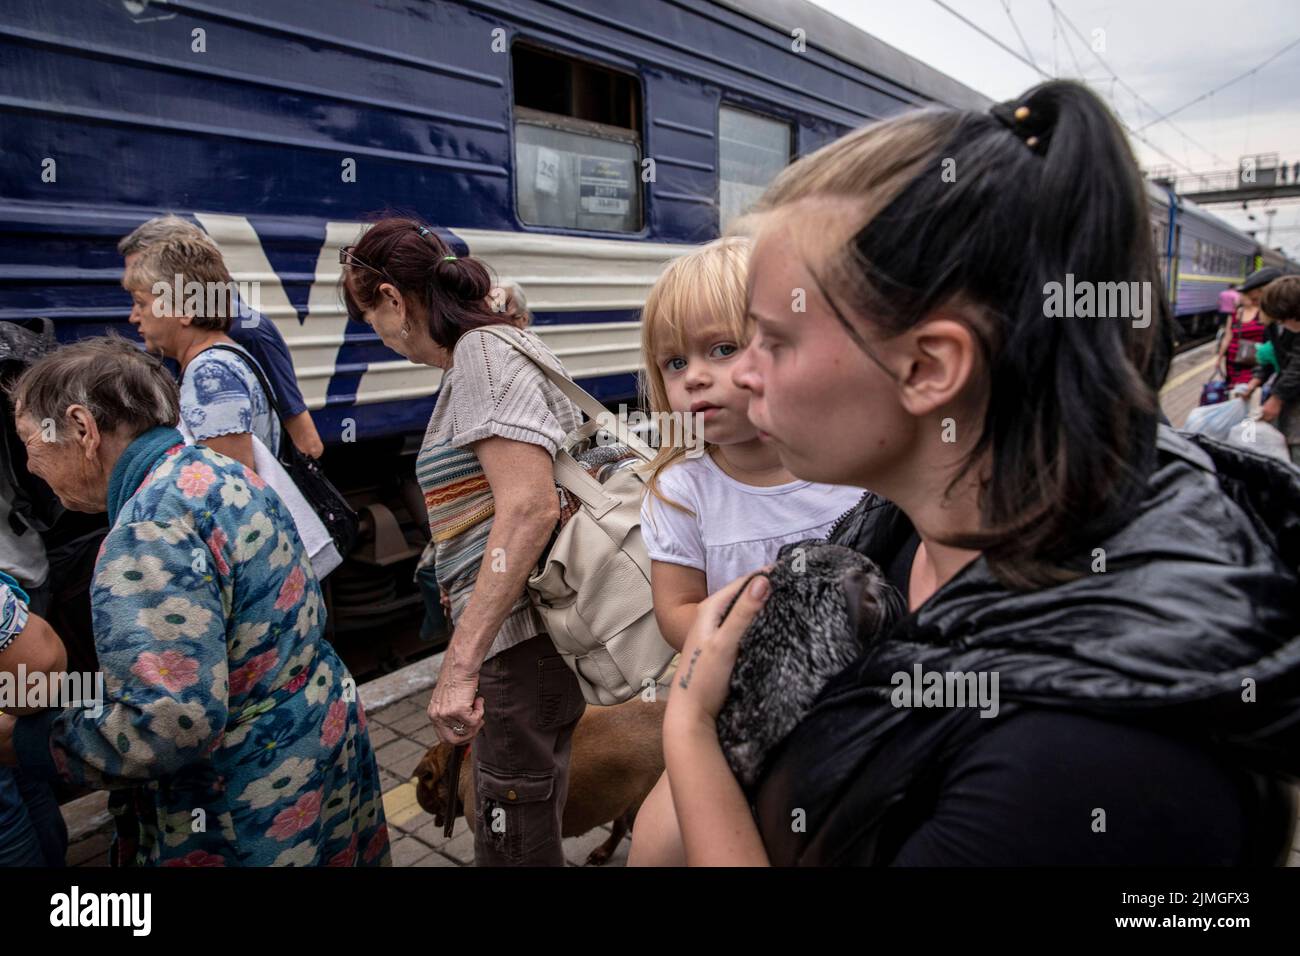 A mother holds her daughter boarding the evacuation train at Pokorvsk Train Station, Donetsk. Amid the intensified fighting in the Eastern part of Ukraine, east Ukraine is now intensifying its civilian evacuation, as millions of Ukrainian families have been evacuating from the closer and closer war, as many of them will be relocated to the western part of the country. According to the United Nations, at least 12 million people have fled their homes since Russia's invasion of Ukraine, while seven million people are displaced inside the country. Stock Photo